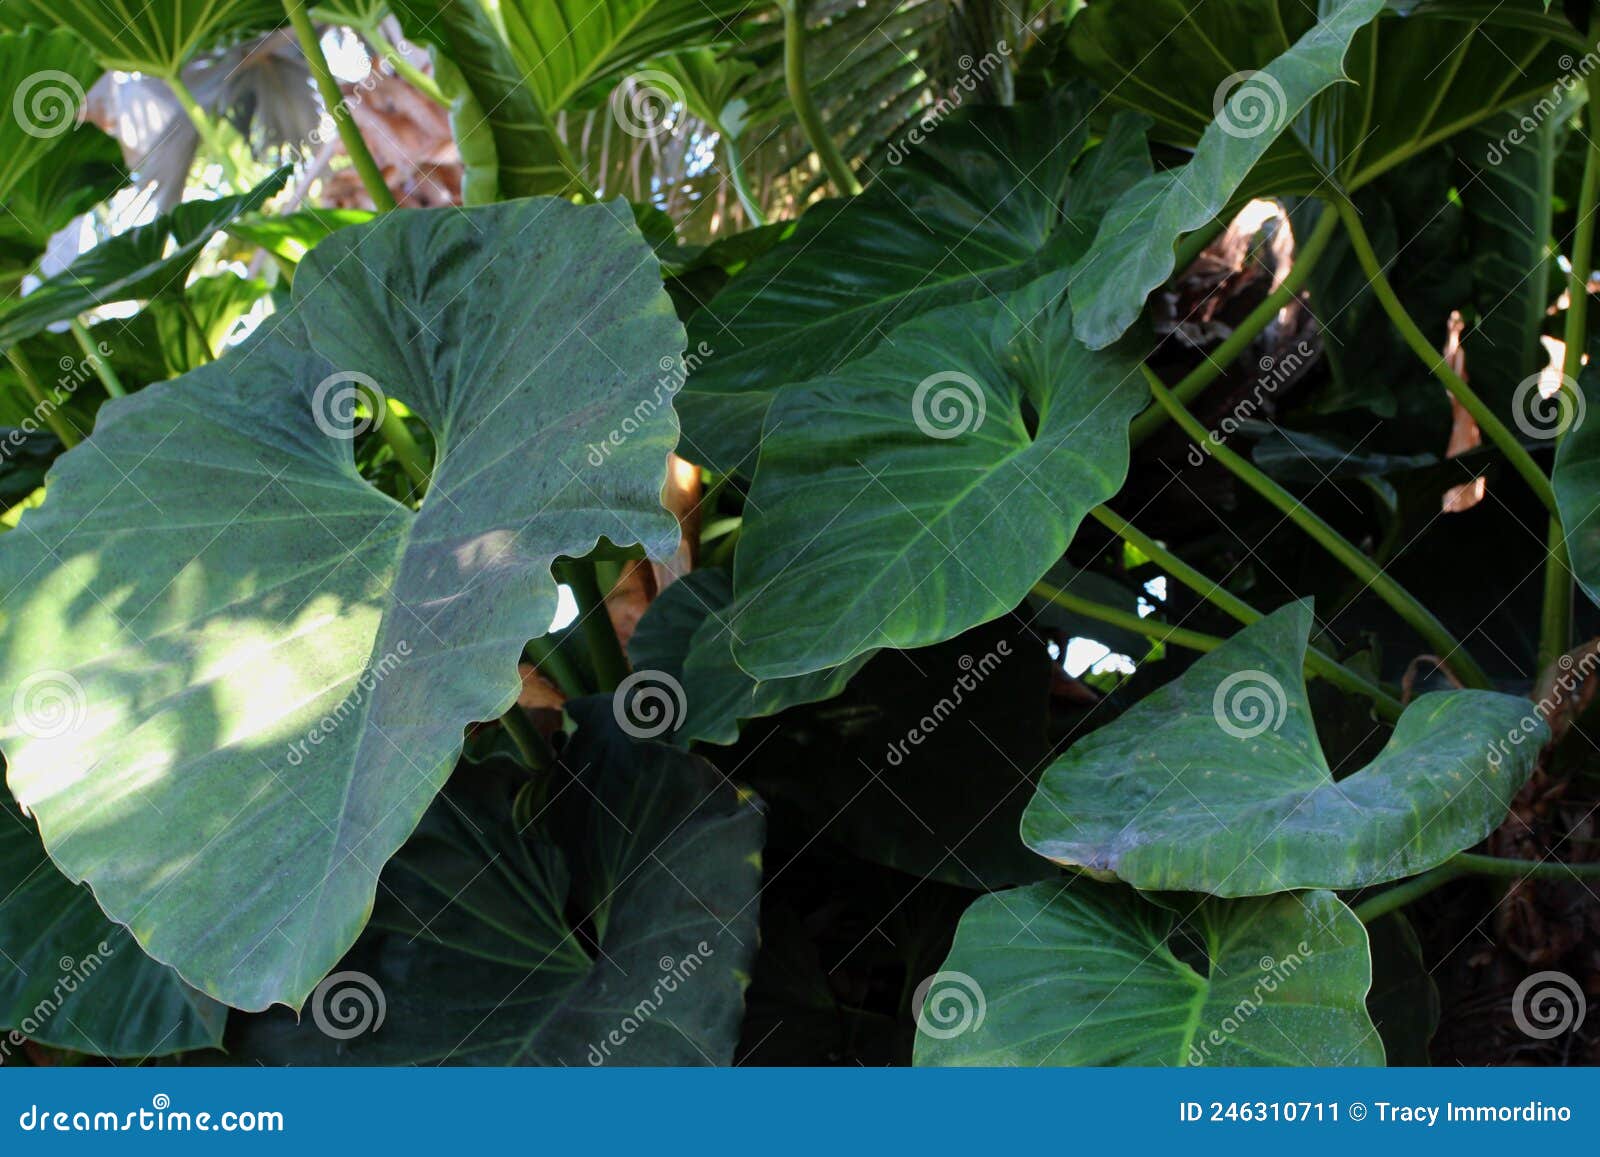 a huge, sprawing philodendron plant growing in a garden in rockford, illinois